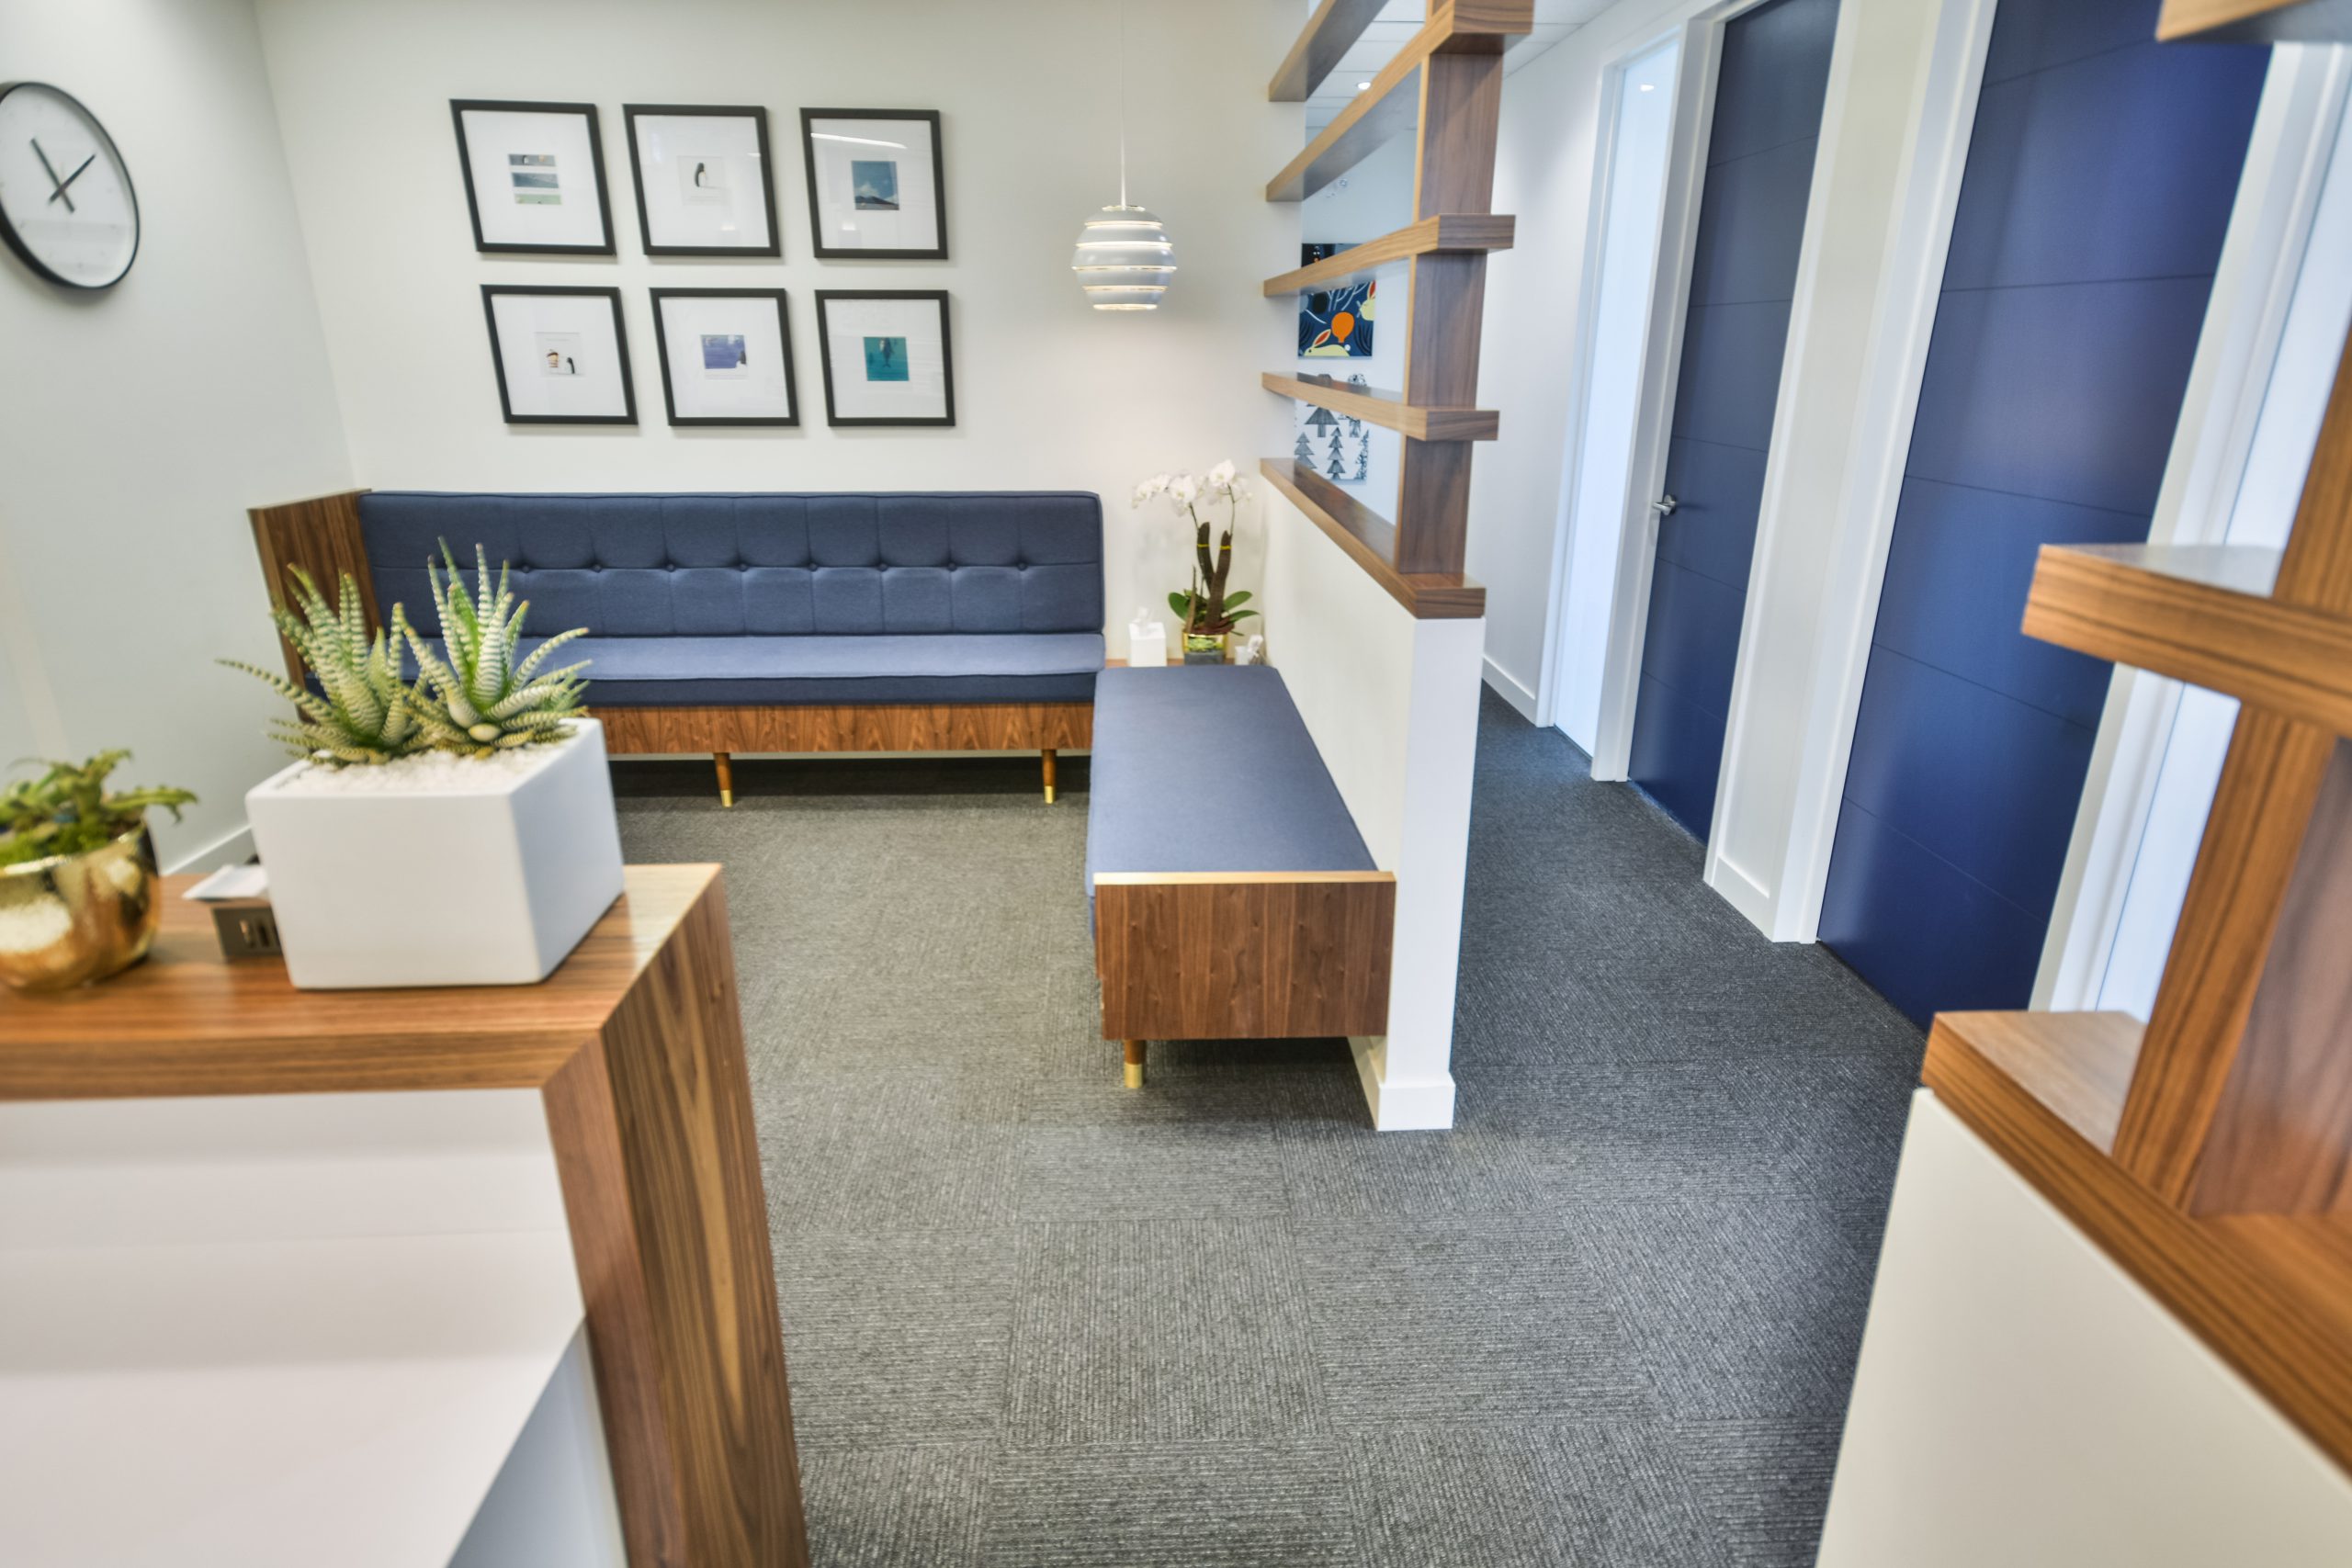 Customer waiting area in a dental health office, designed by Cutler